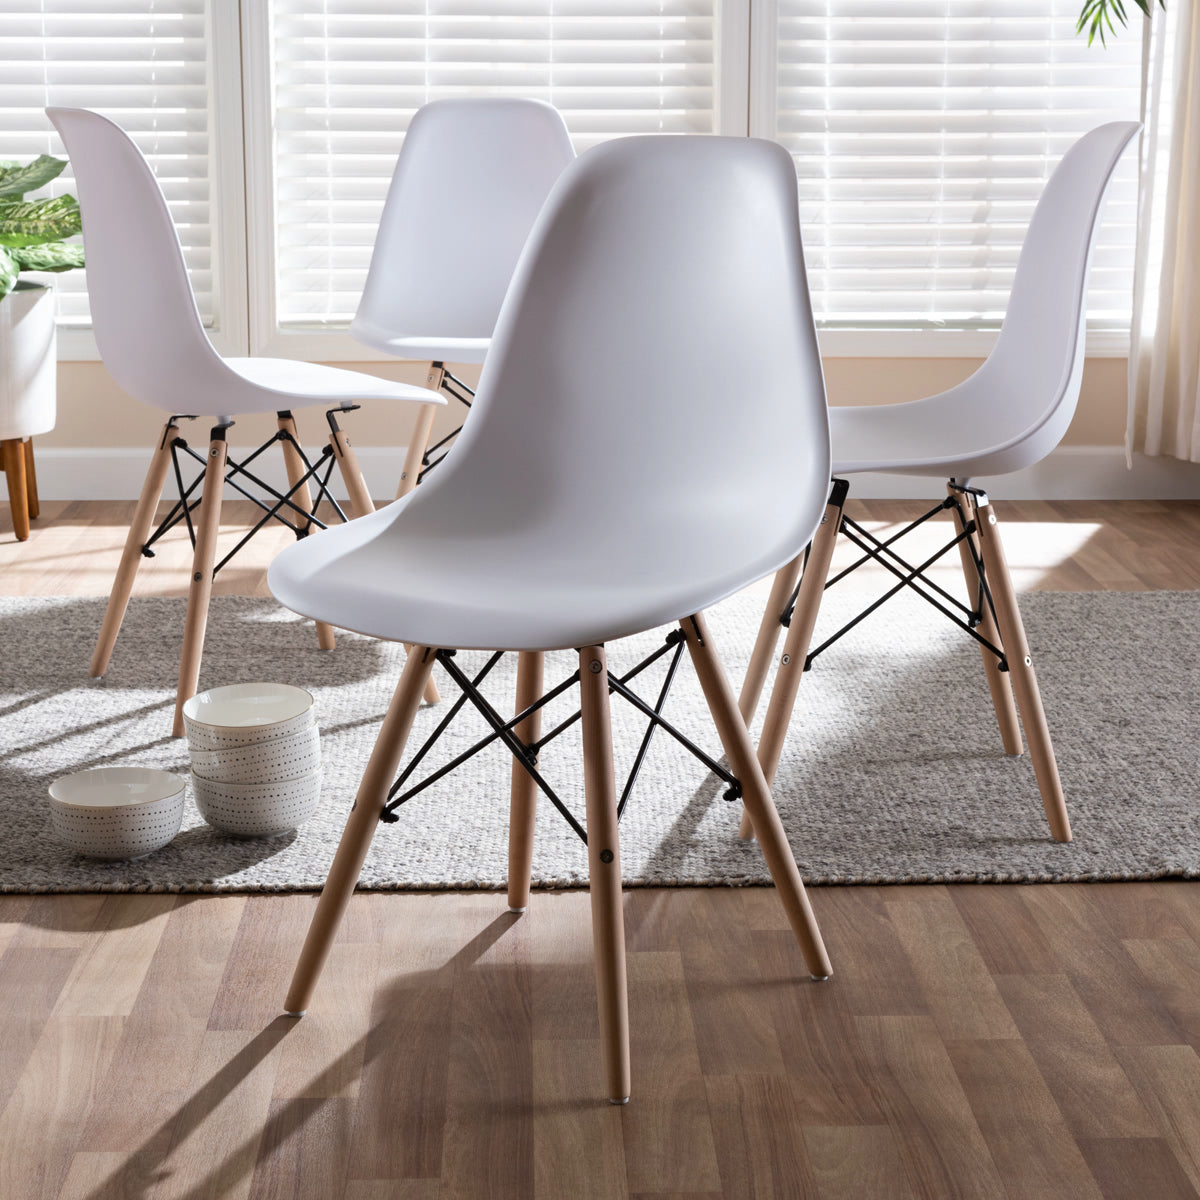 Baxton Studio Sydnea Mid-Century Modern White Acrylic Brown Wood Finished Dining Chair (Set of 4) Baxton Studio-dining chair-Minimal And Modern - 3